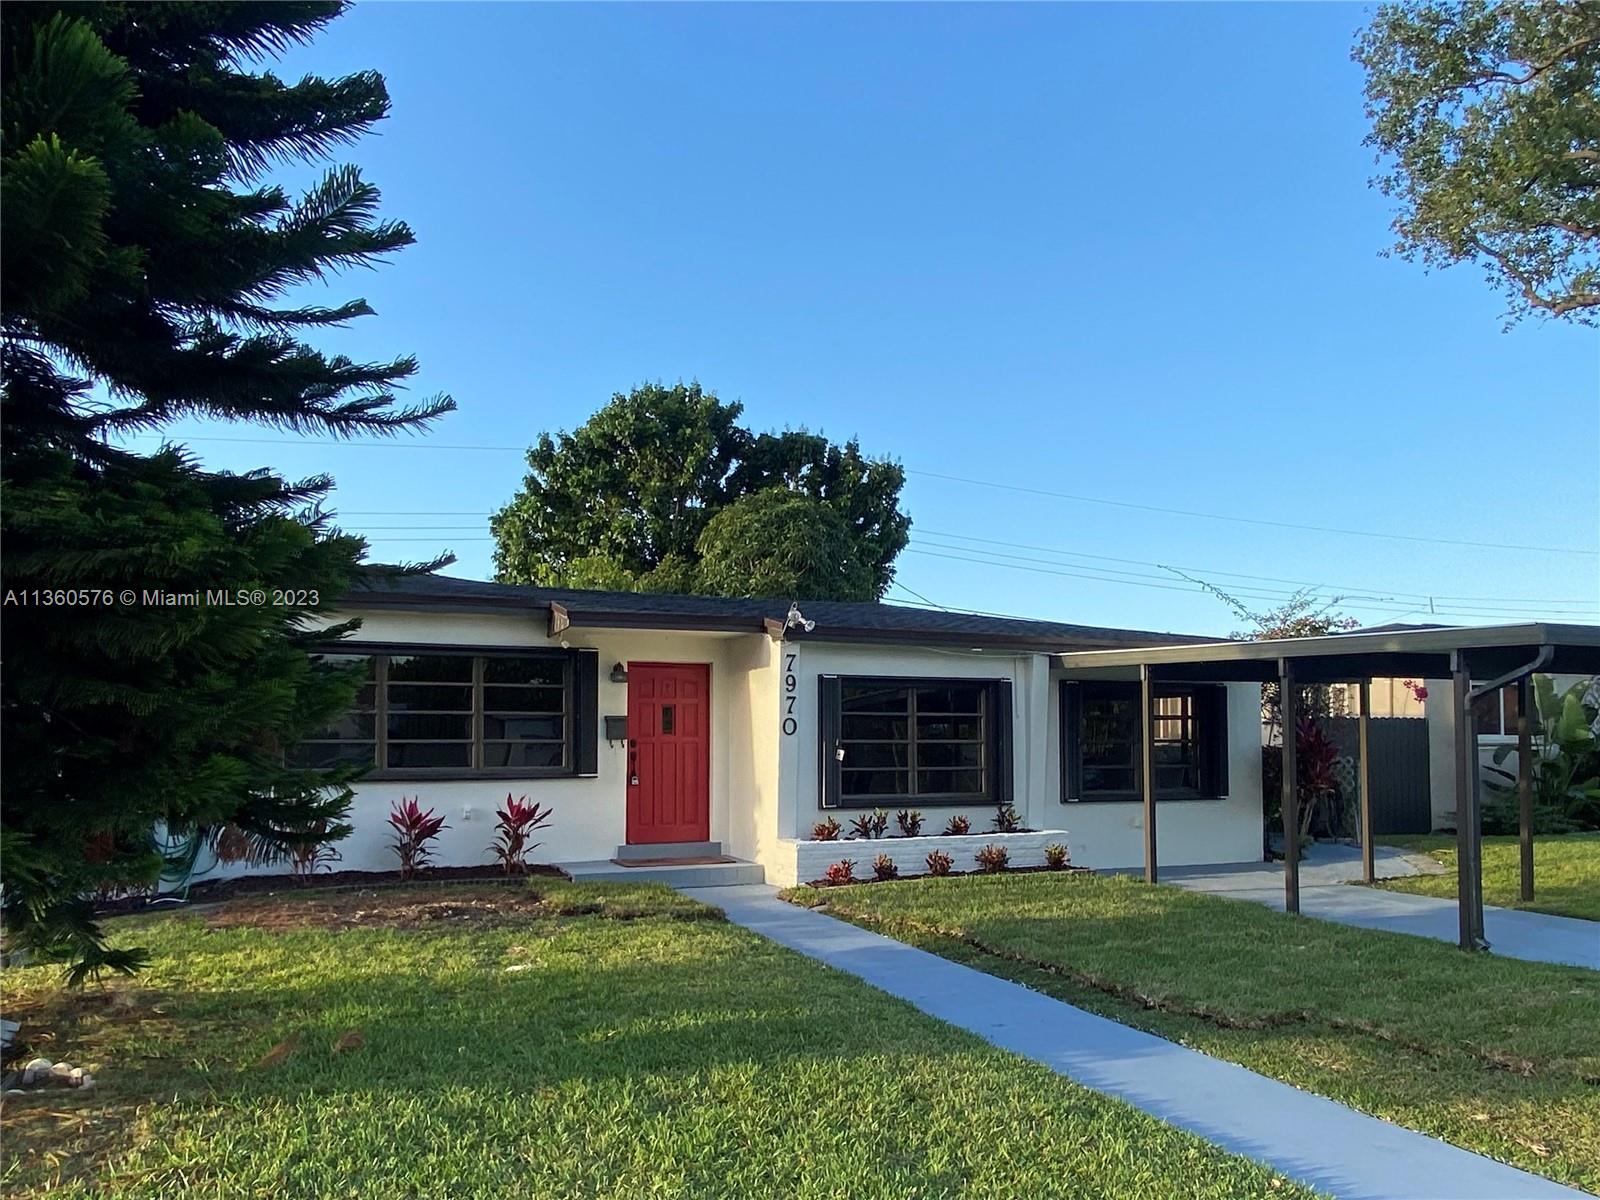 Freshly Renovated 3/2+DEN + BONUS ROOM Pool Home in Desirable Westchester w/ a 8025 sq ft lot. This crisp, clean home has  New upgrades in 2022/23 to include: NEW roof, New Kitchen Cabinets and Corian Countertops, All new SS Appliances, New Laminate flooring throughout, Baseboards, Int/Ext Painting, New Lighting , Ceiling Fans, New Electrical lines to the Pool w/ Rebuilt Pool Pump. The Covered Area has been renovated with New Composite Panel Flat Roof and New Lighting.  Minutes to Palmetto Expressway & other major highways. Close to MIA International Airport, Coral Gables, Dadeland, Baptist Hospital and walking distance to Tropical Park and shopping.